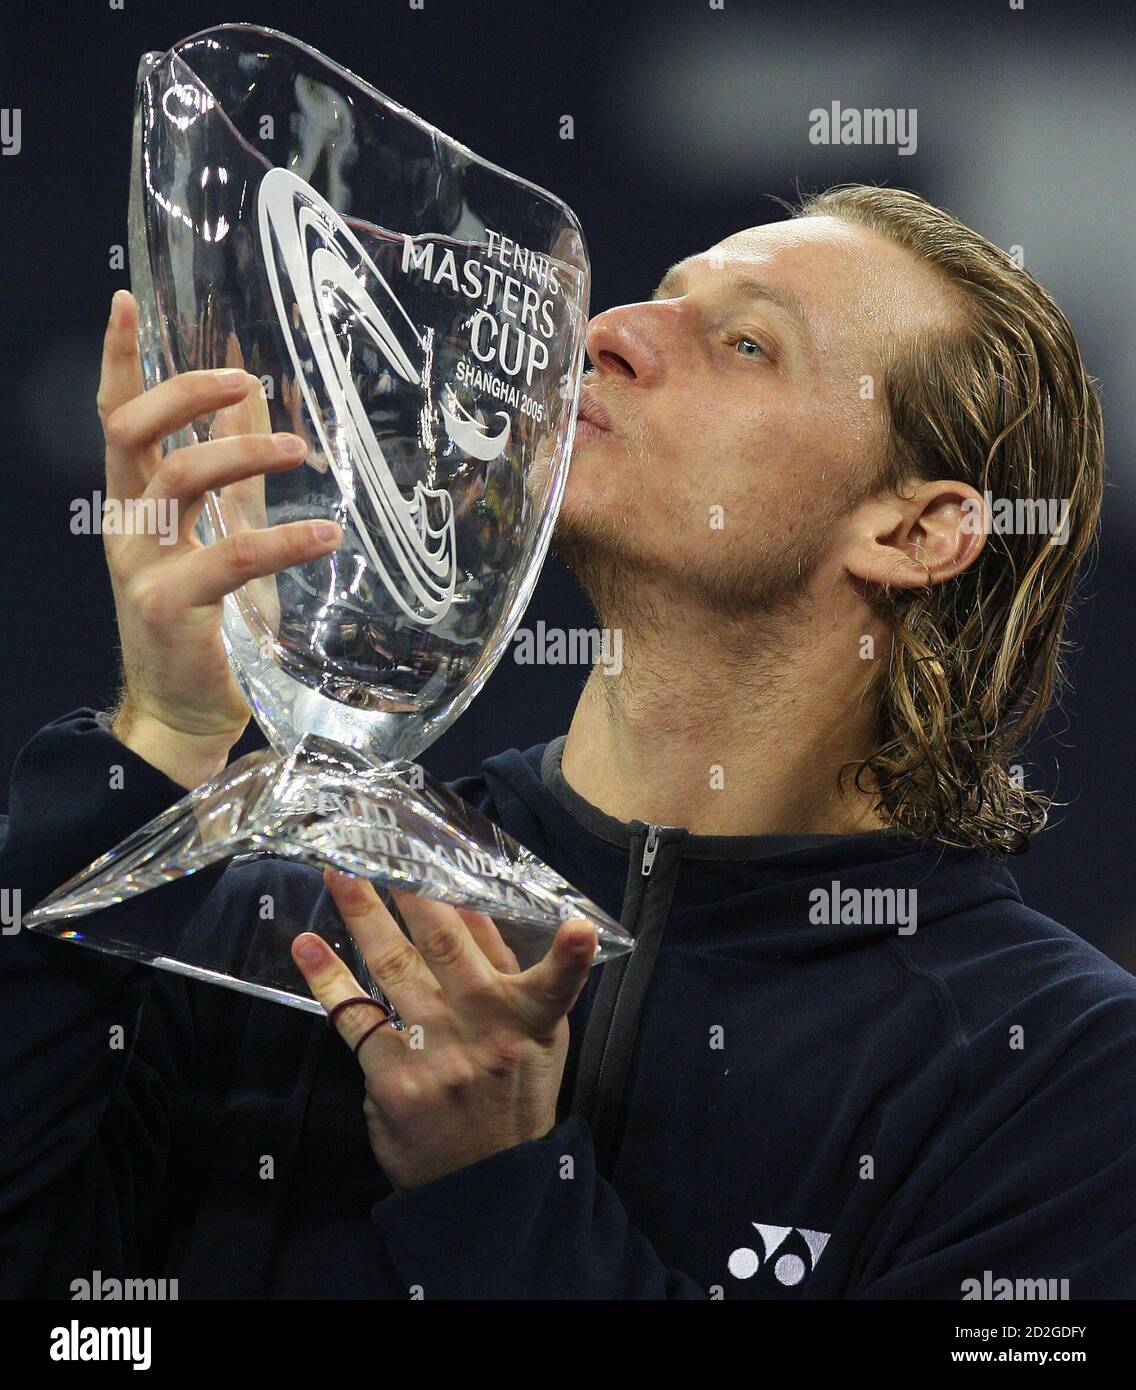 David Nalbandian of Argentina, winner of the Tennis Masters Cup in Shanghai,  kisses the trophy at the end of a match with Roger Federer of Switzerland  November 20, 2005. Nalbandian fought back